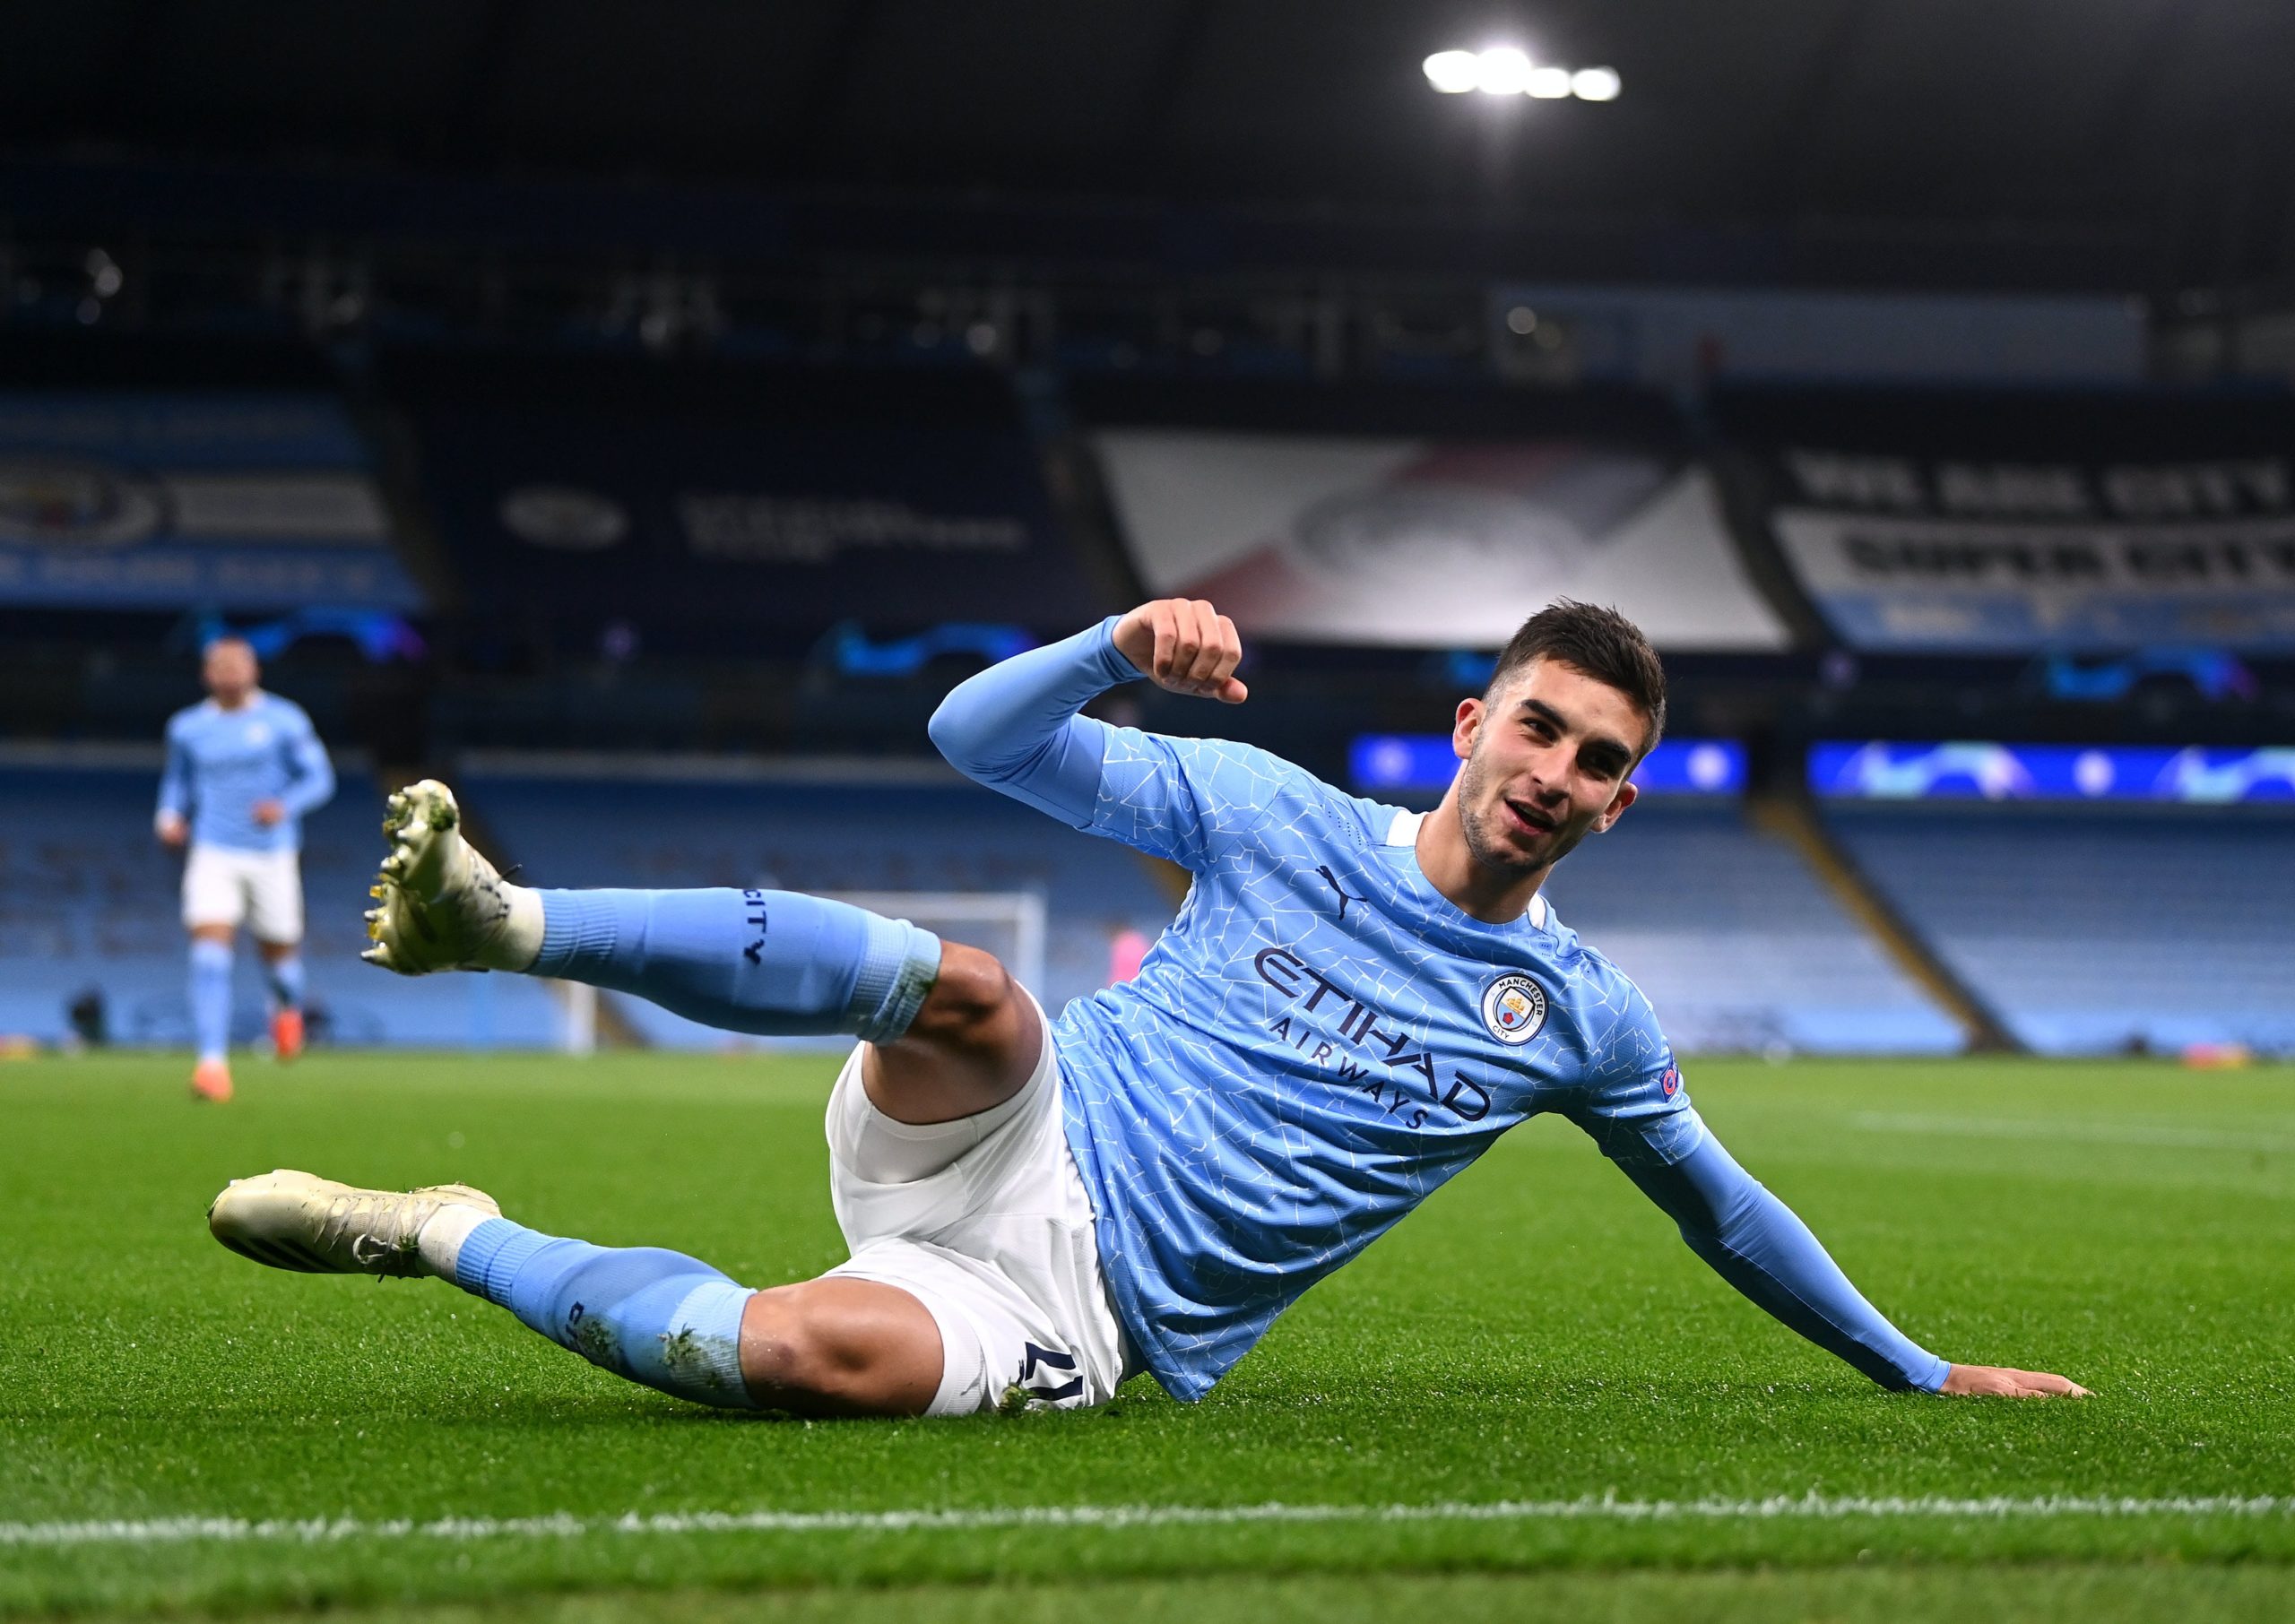 UEFA Champions League LIVE OLympiacos vs Man.City Head to Head Statistics, Possible Line-ups, Premier League Dates, LIVE Streaming Link, Teams Stats Up, Results, Fixture, and Schedule